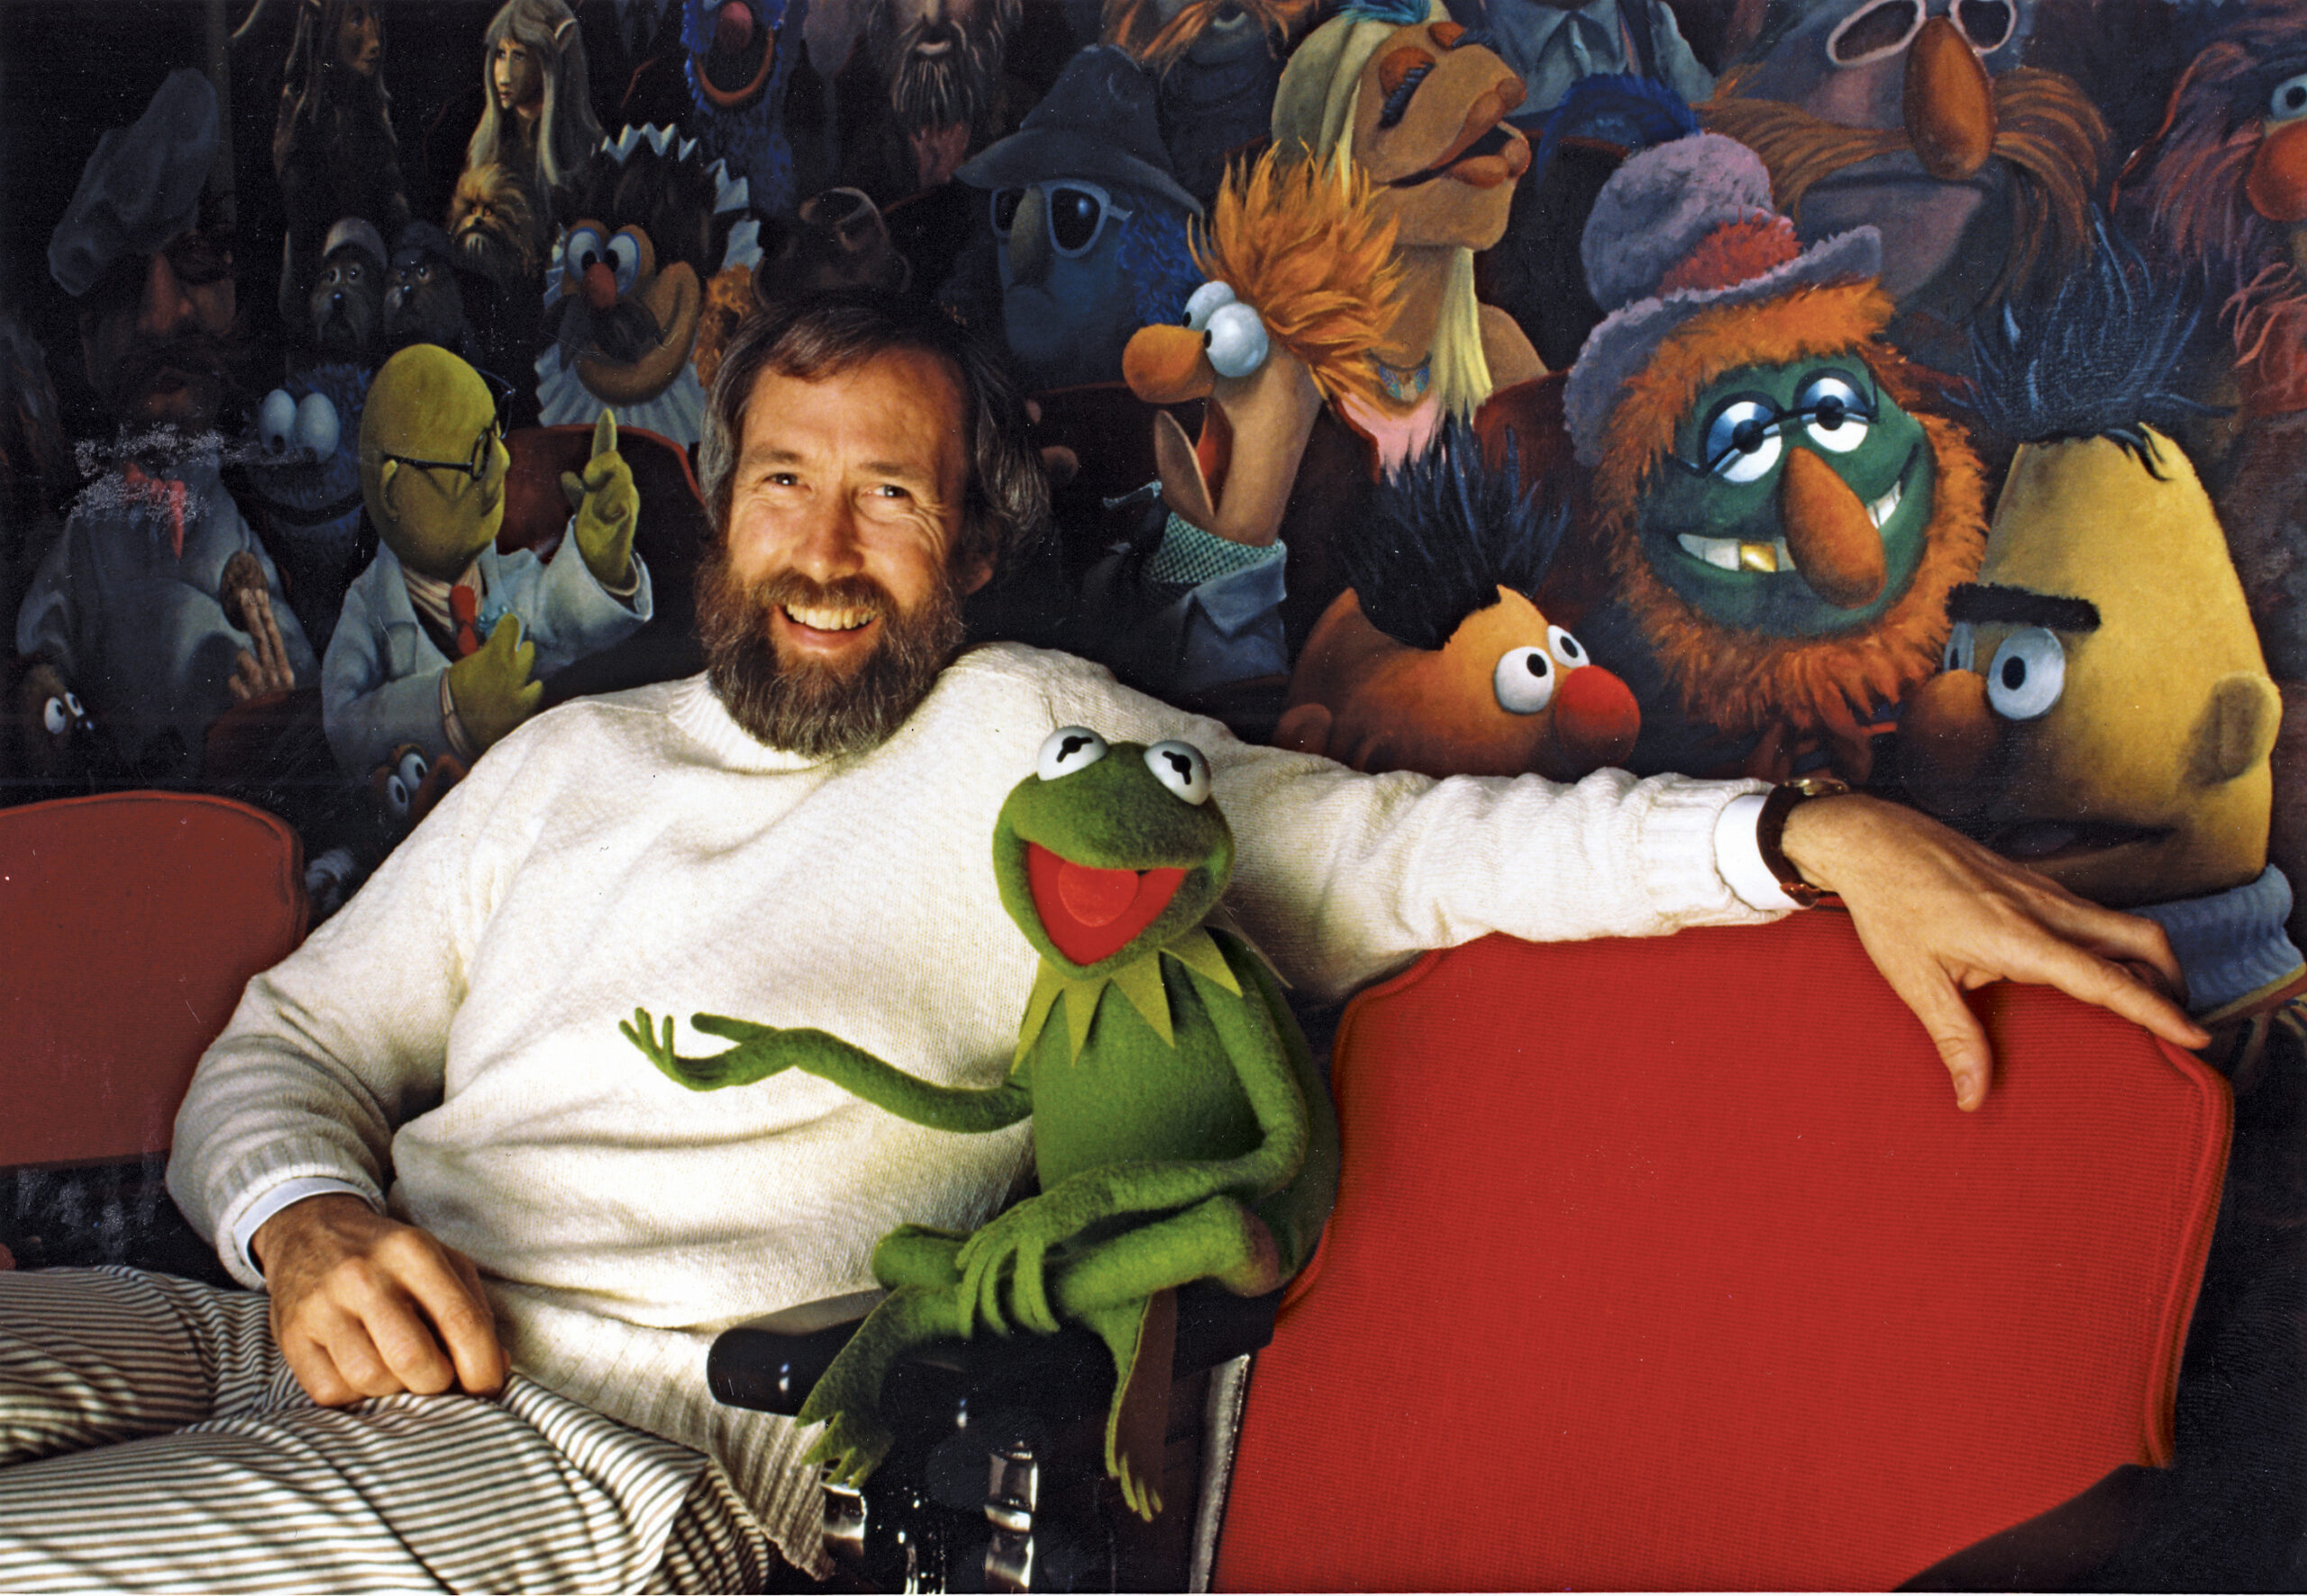 Jim Henson and his iconic creation Kermit the Frog in front of a mural of Muppets characters by Coulter Watt.